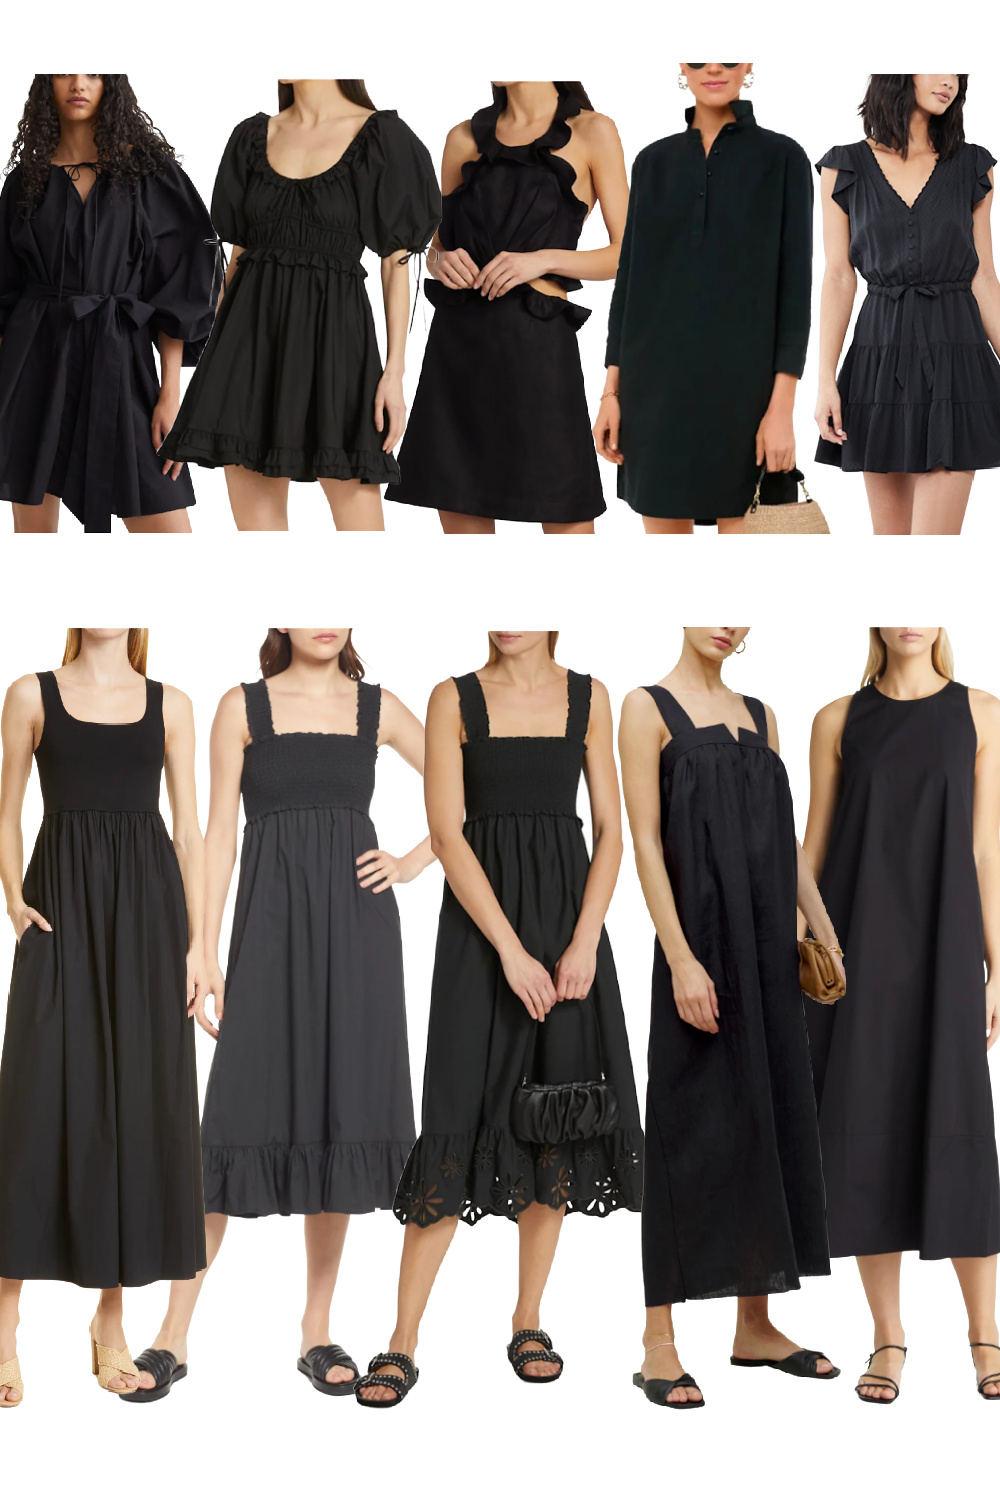 How to Style a Black Dress for Summer